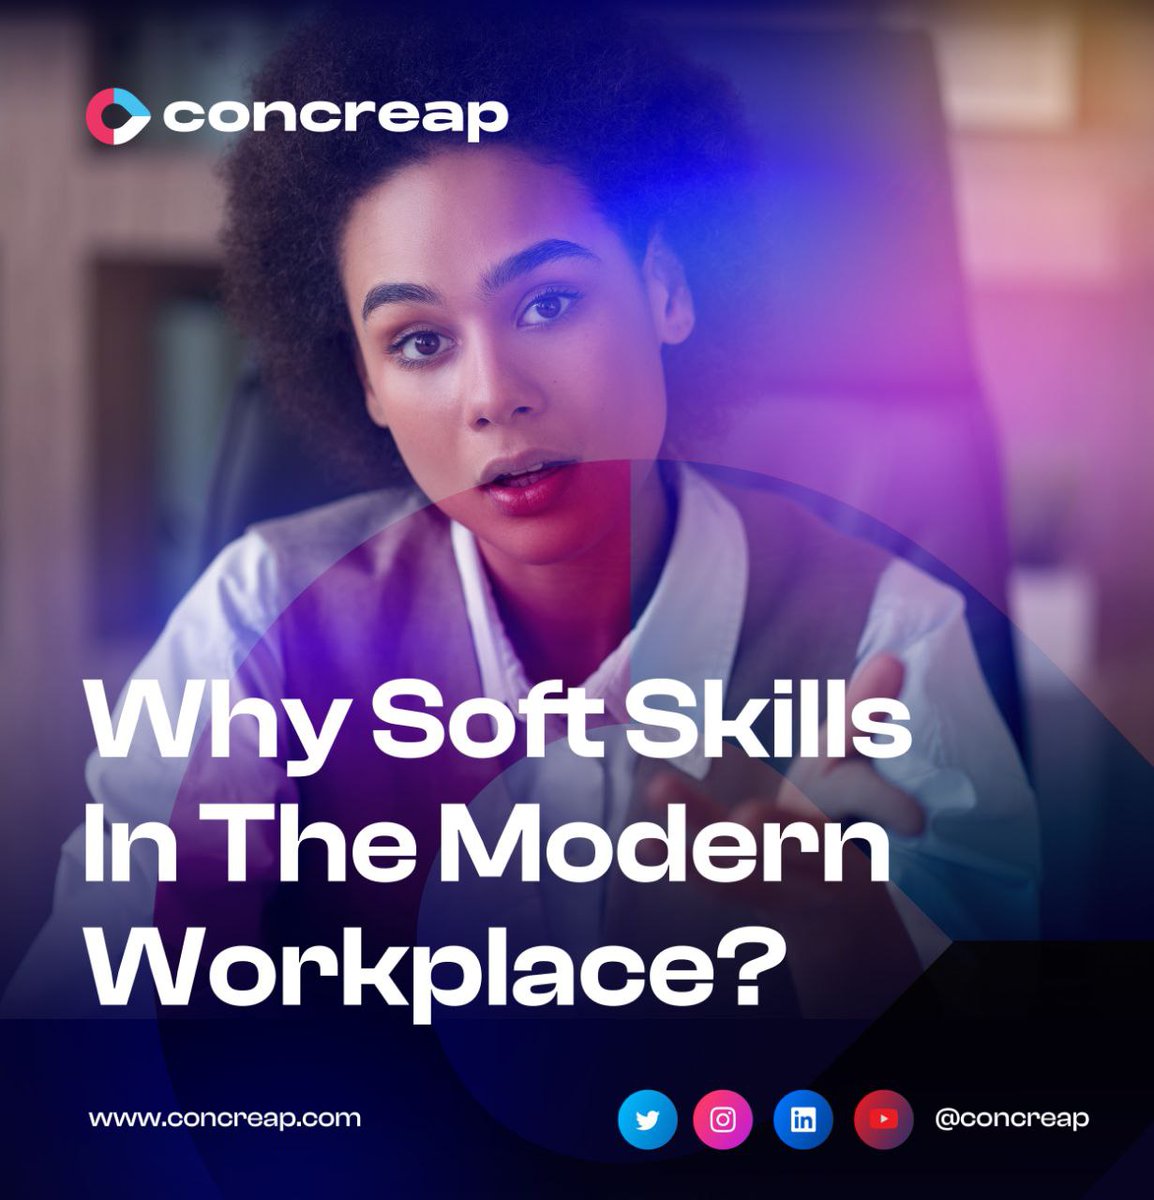 After now, you certainly won't trivialize 'Softskills' 😊

Beyond technical prowess, they are the glue-binding teams, fostering innovation, and navigating complex challenges! 

#monday #softskills #workplace #careergoals